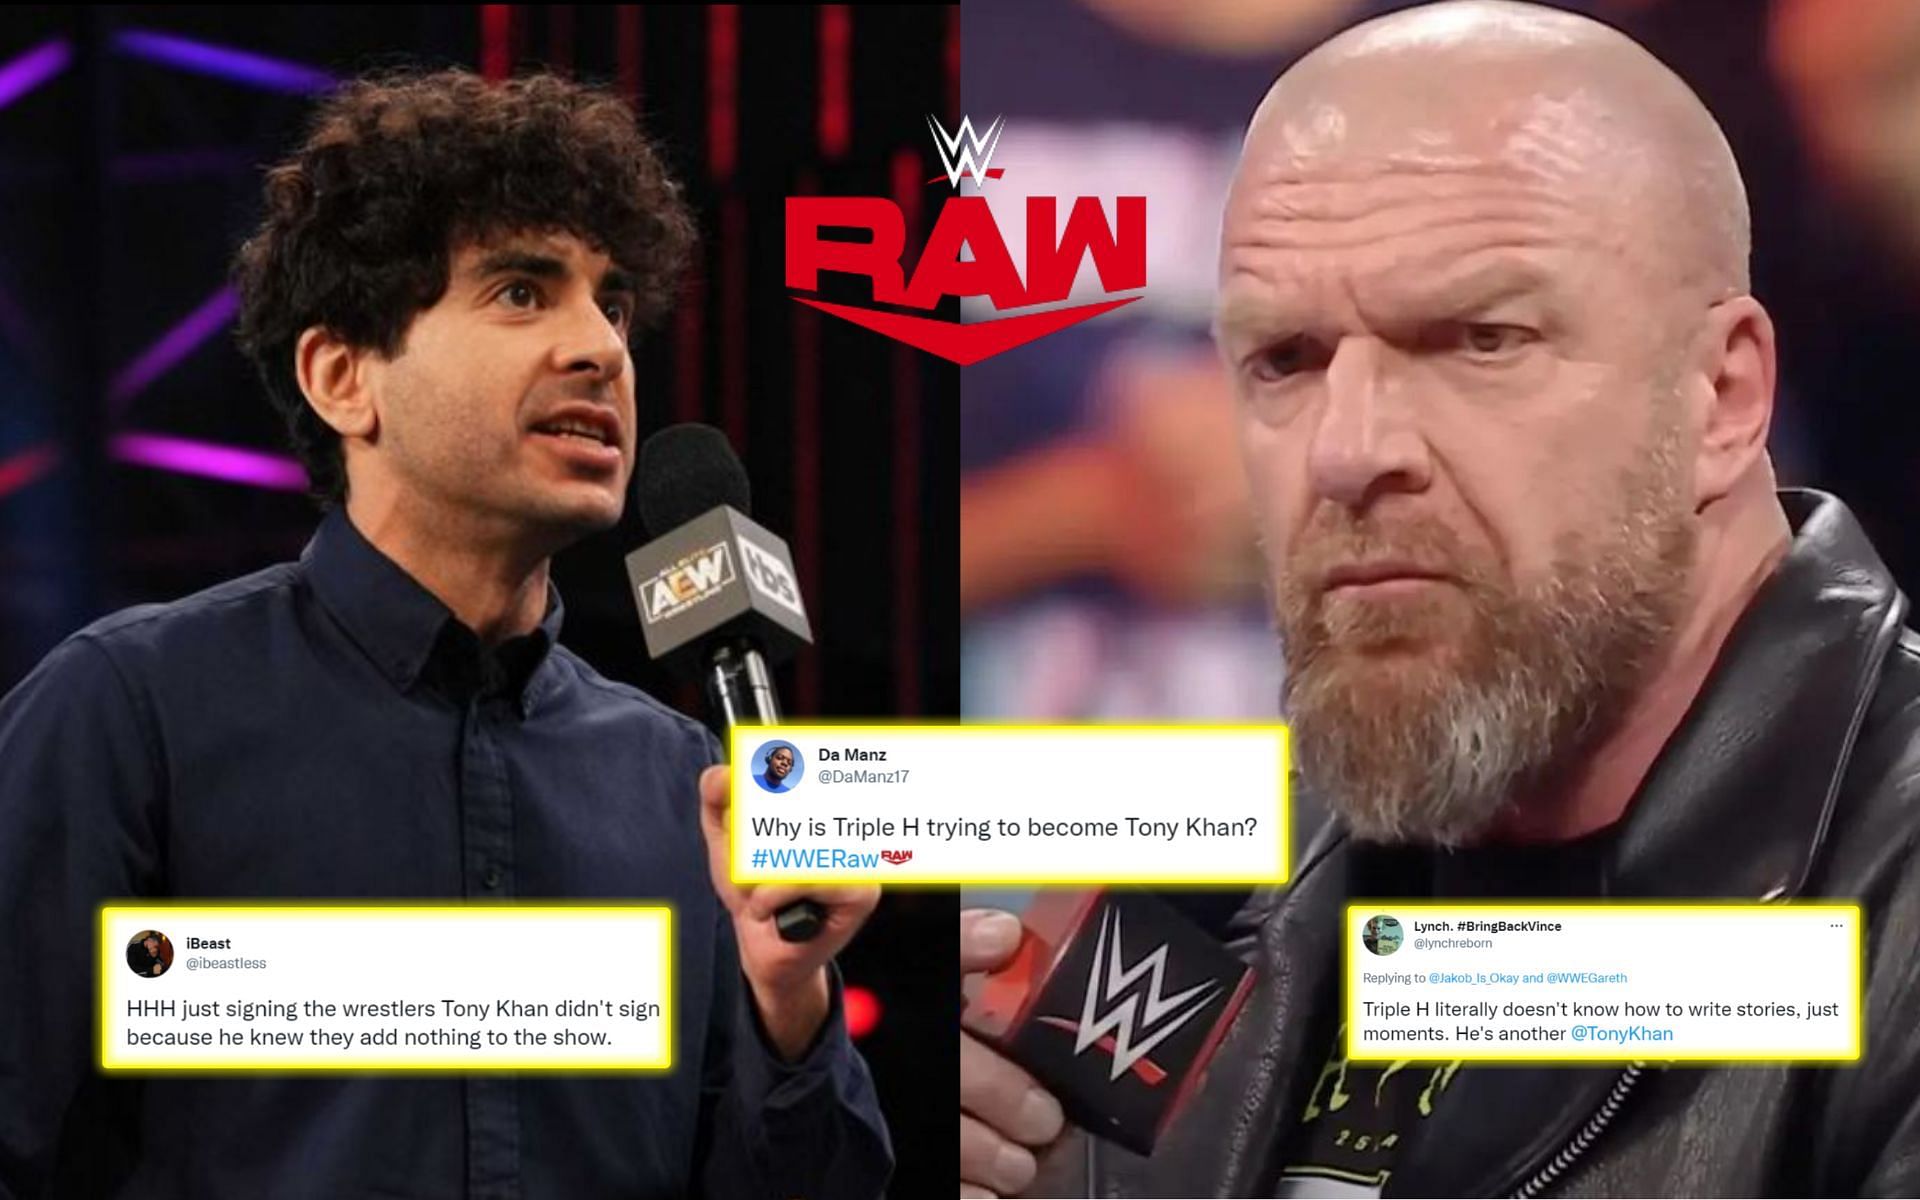 Triple H and Tony Khan have invisibly butted heads and given each other intense competition